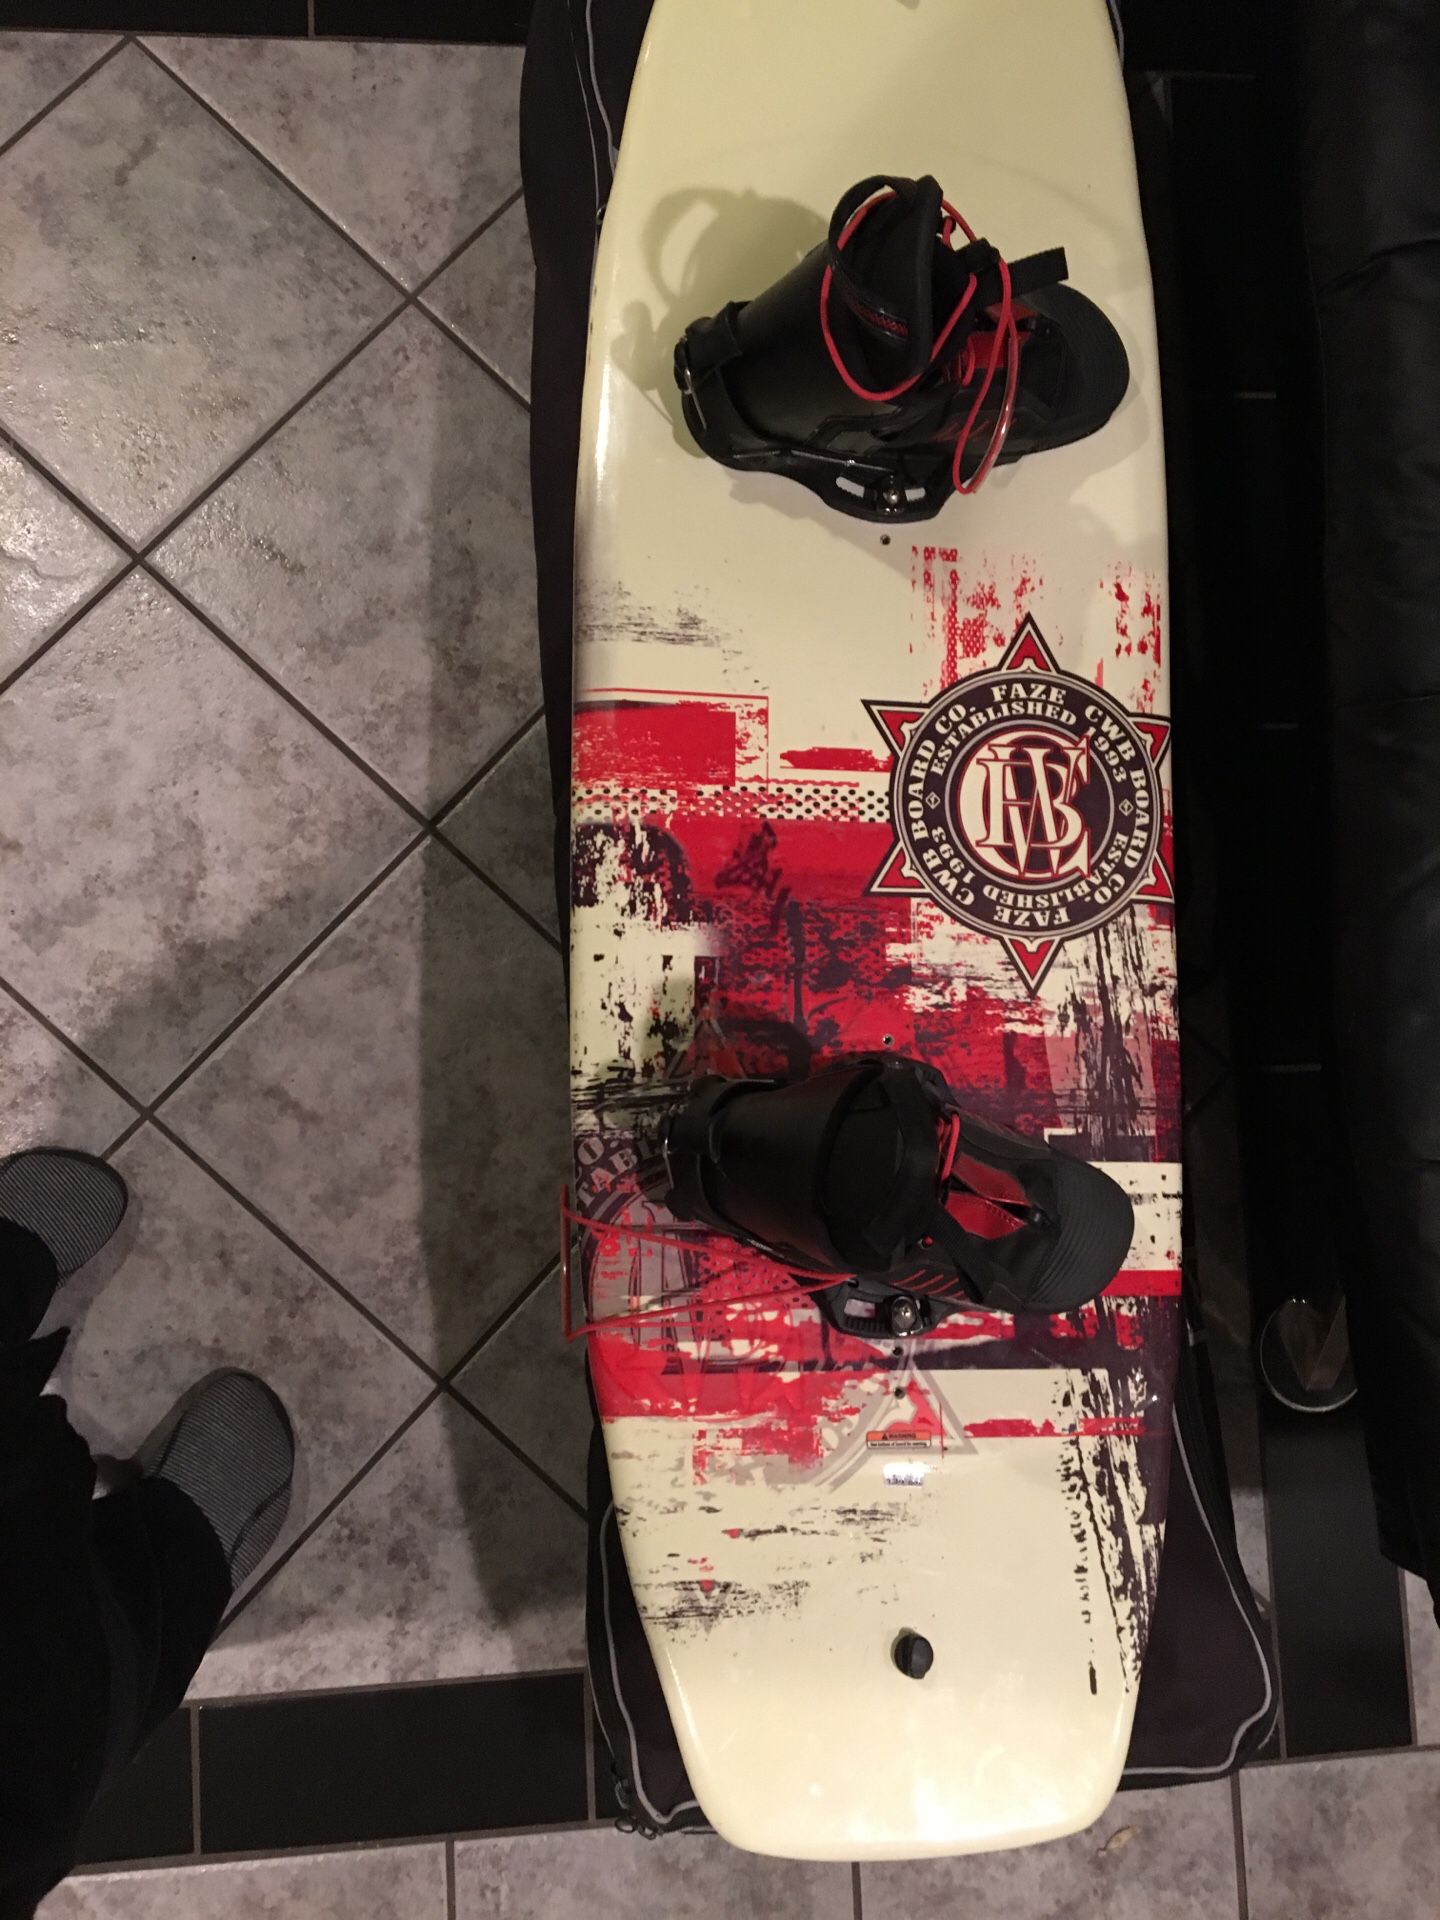 Photo CWB Wakeboard in great shape. No longer have boat due to illness. Have other boards as well.